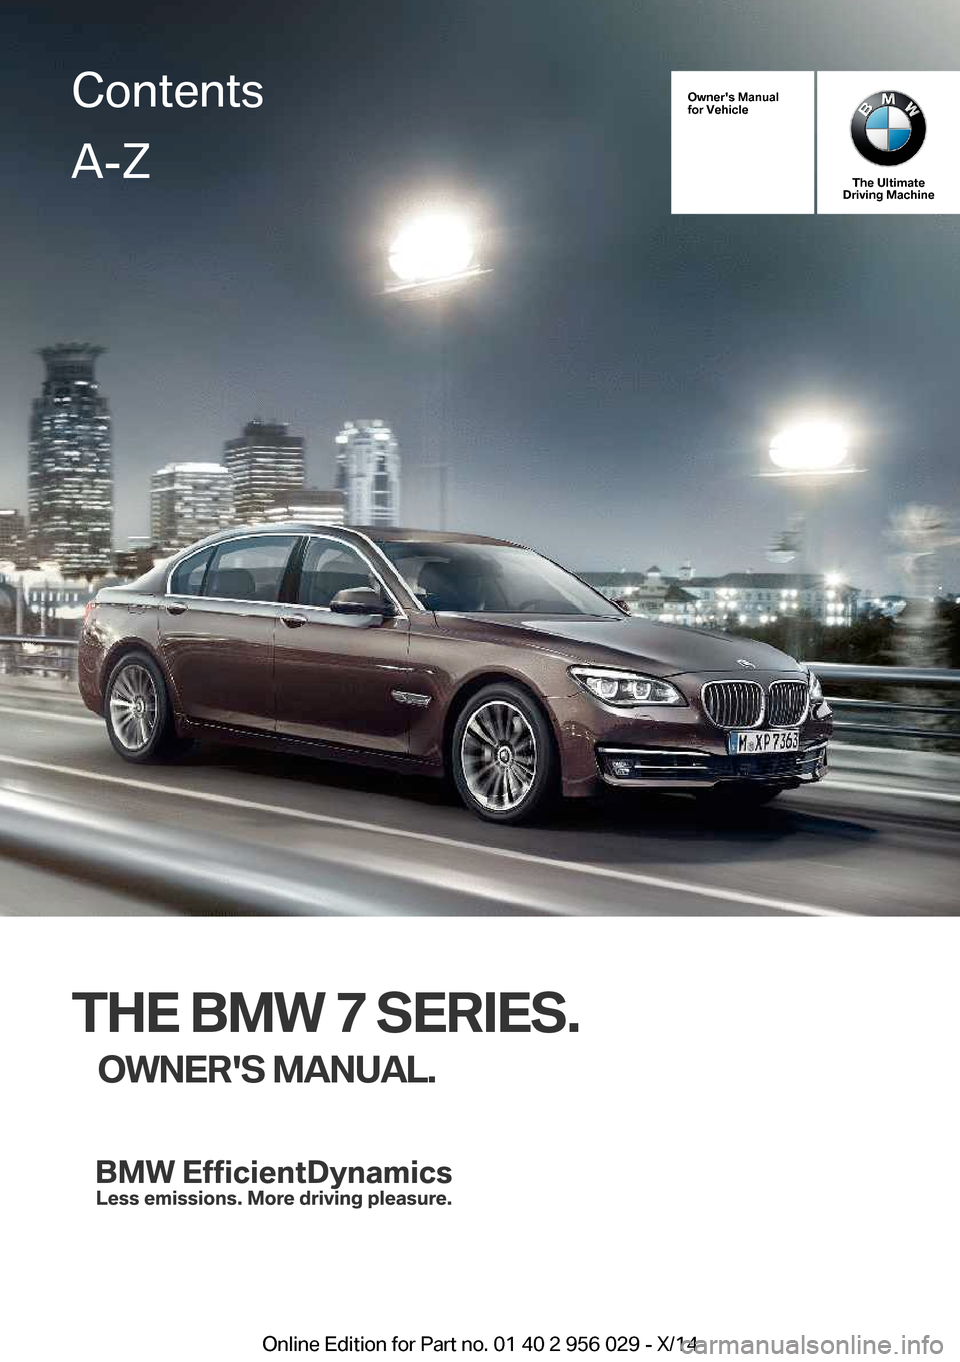 BMW 7 SERIES 2014 F02 Owners Manual Owners Manual
for Vehicle
The Ultimate
Driving Machine
THE BMW 7 SERIES.
OWNERS MANUAL.
ContentsA-Z
Online Edition for Part no. 01 40 2 956 029 - X/14   